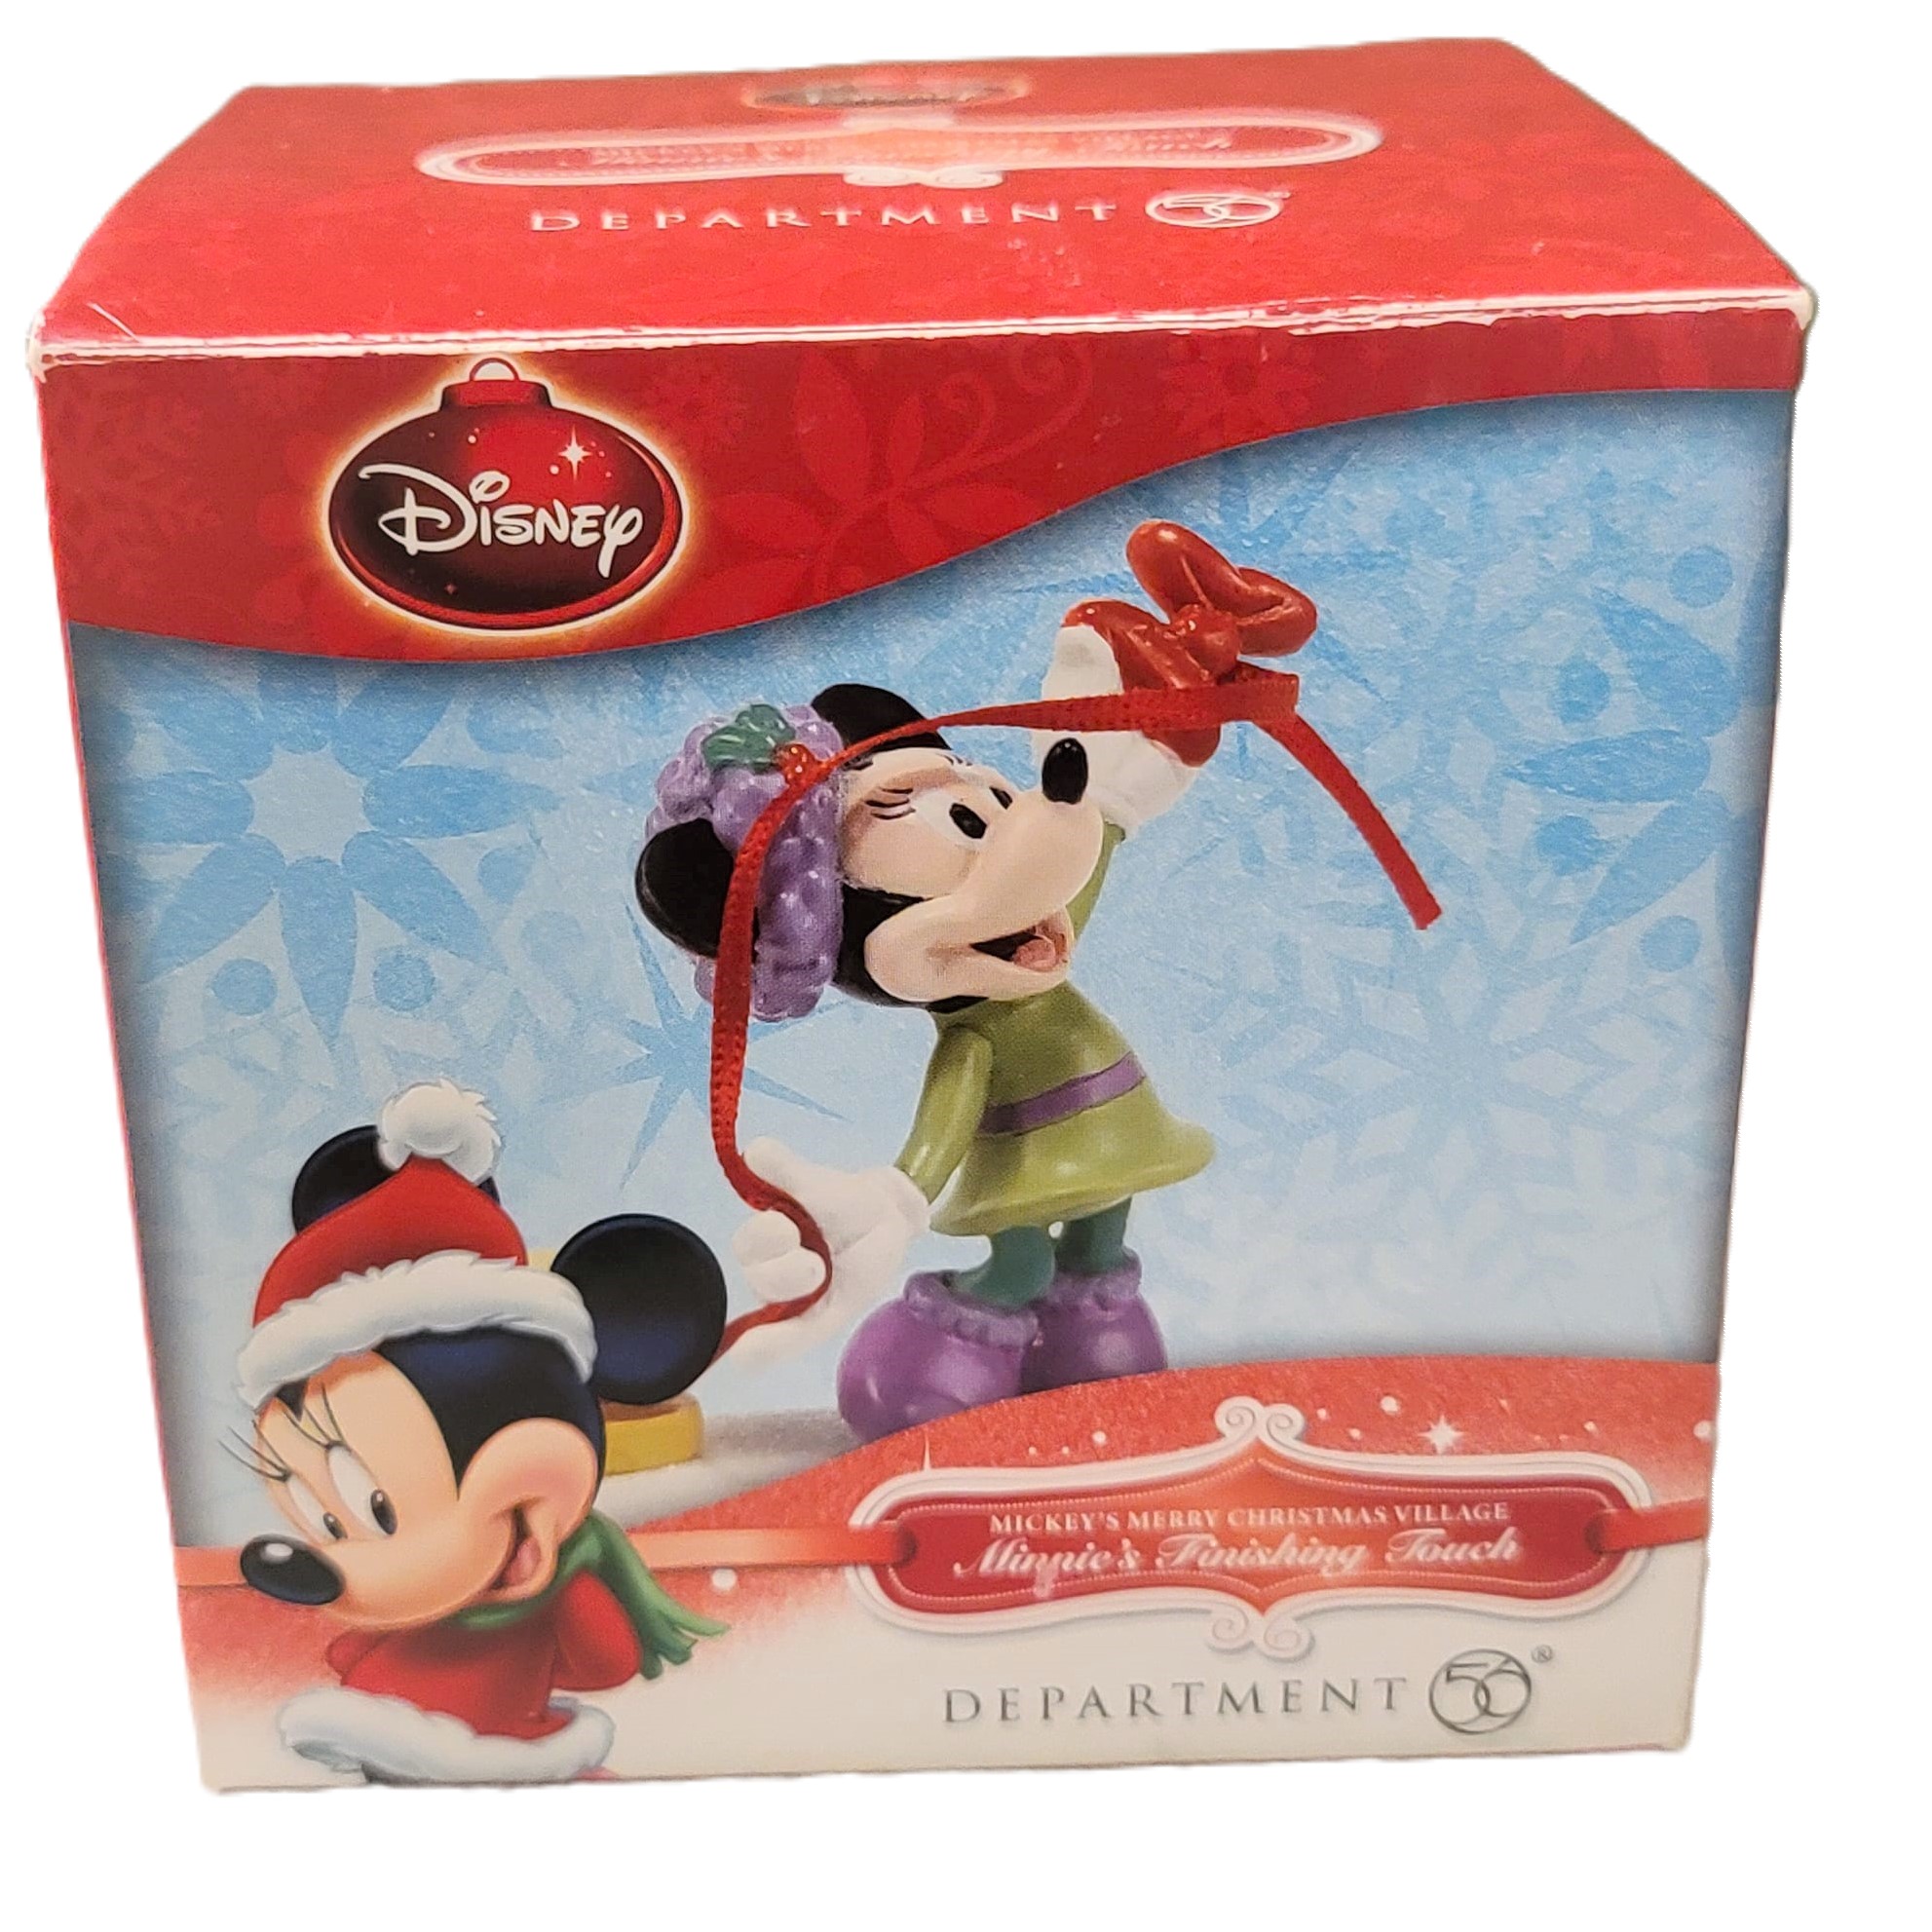 Department 56 Disney Retired Christmas Minnie's Finishing Touch